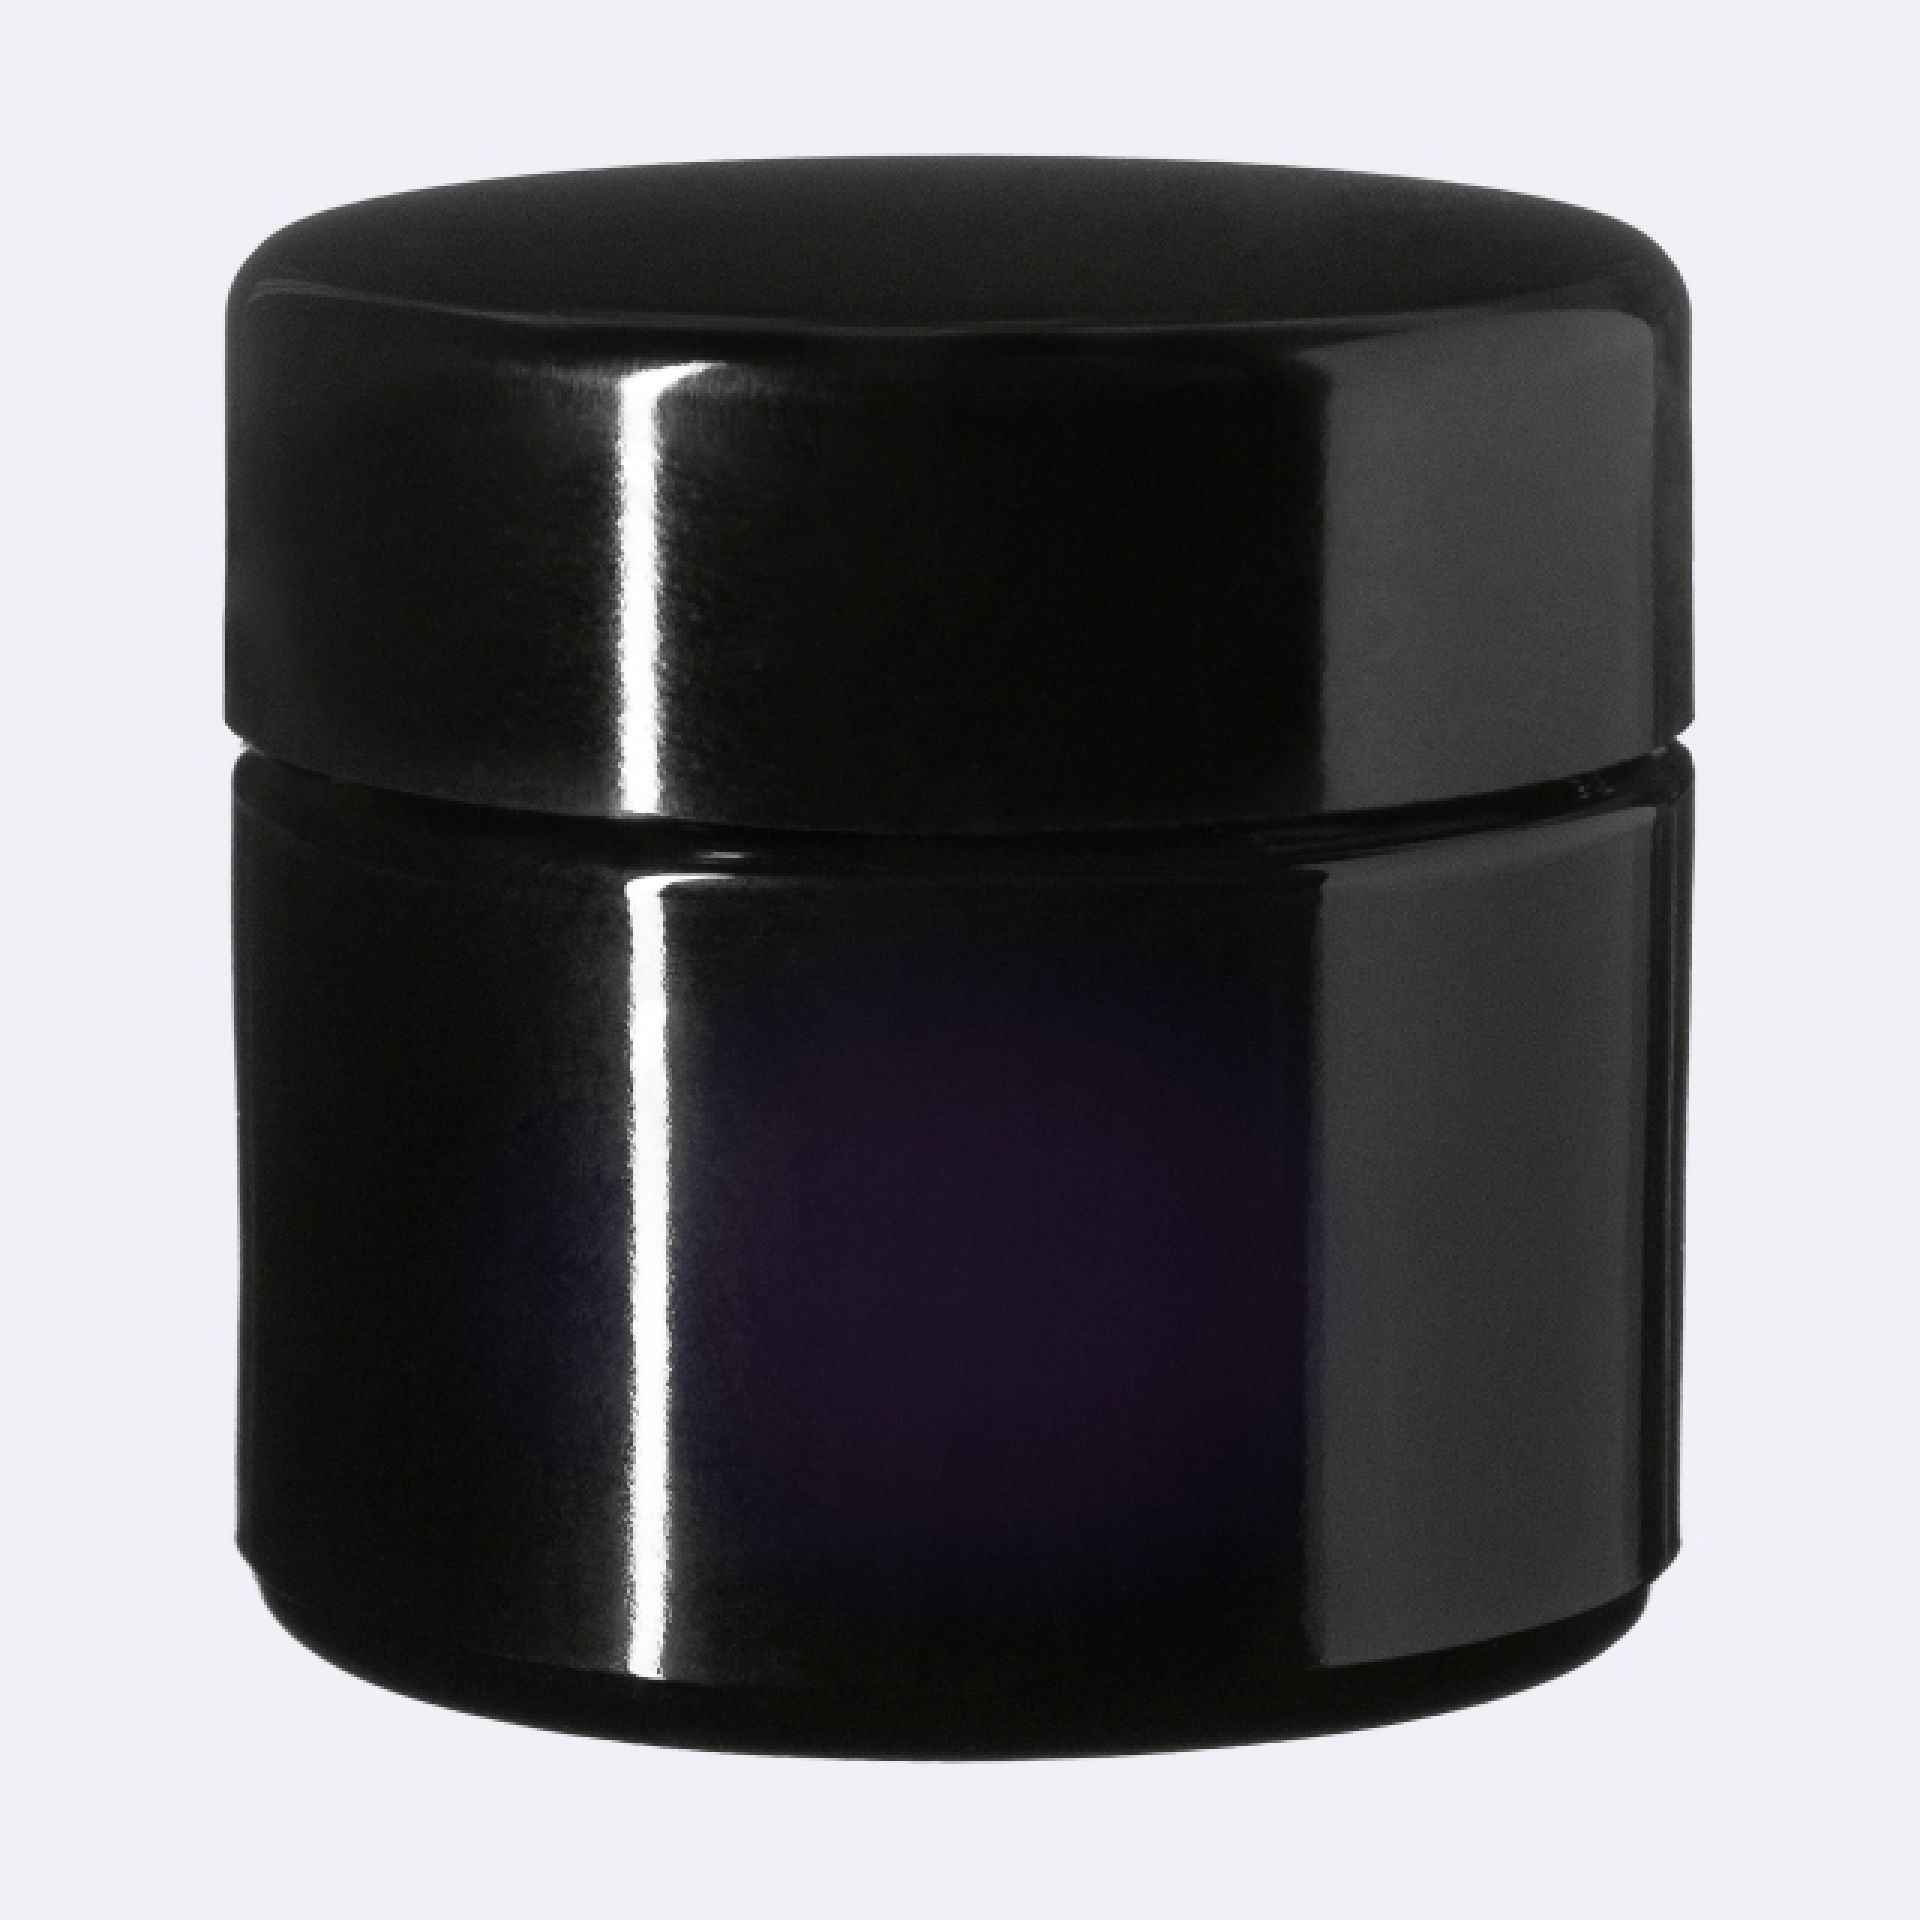 Lid Modern 49 special, UREA, black, semi-glossy finish, violet Phan inlay (Ceres 50)